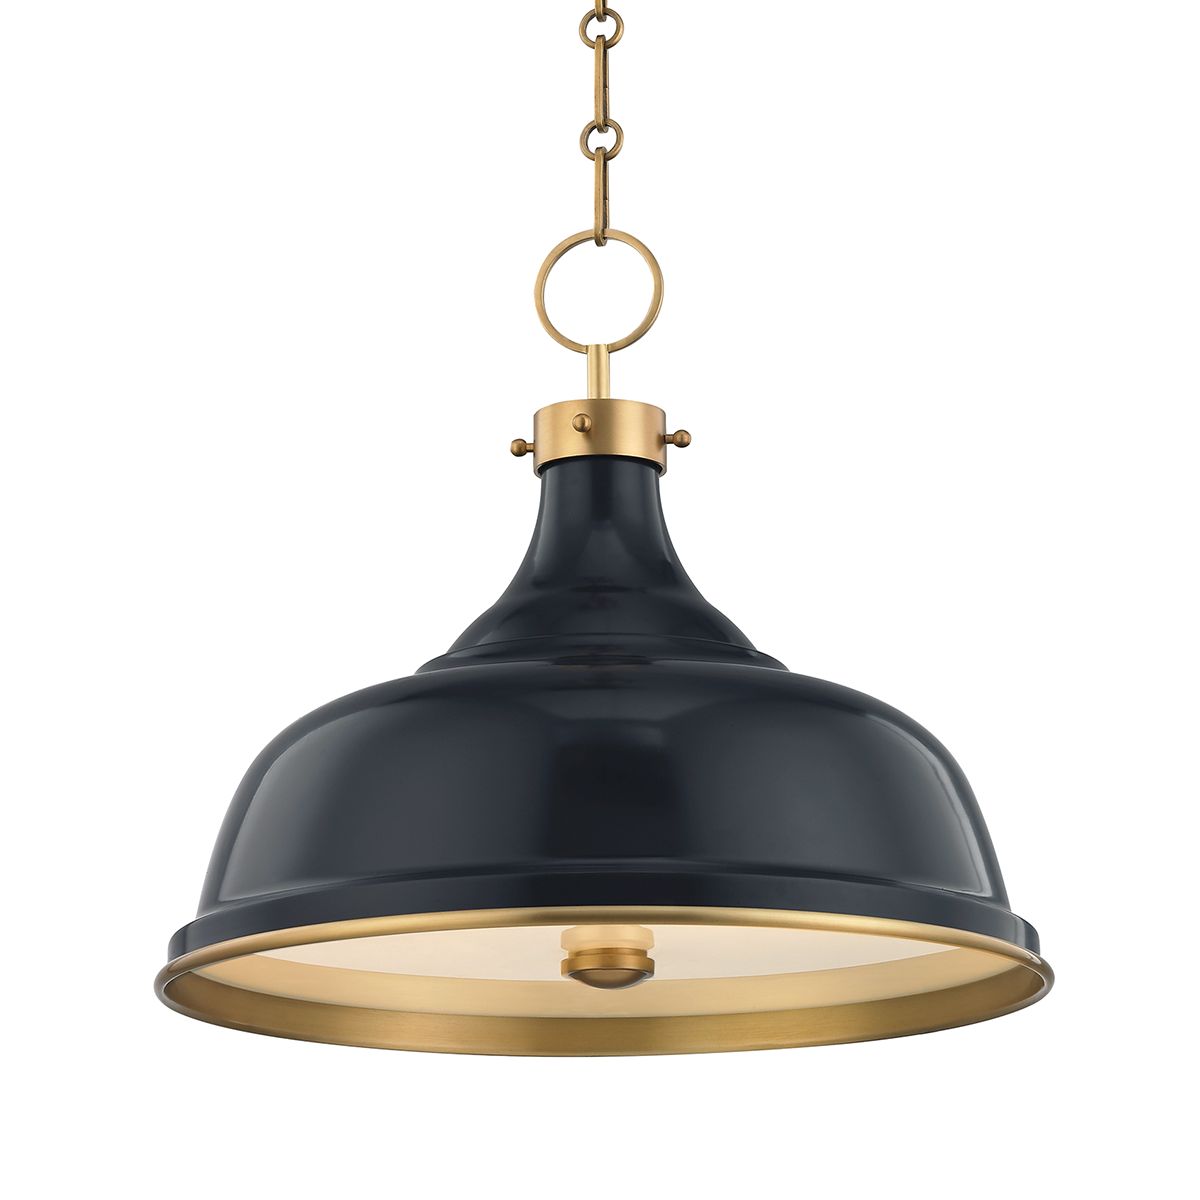 Painted No.1 18 in. 3 Lights Pendant Light